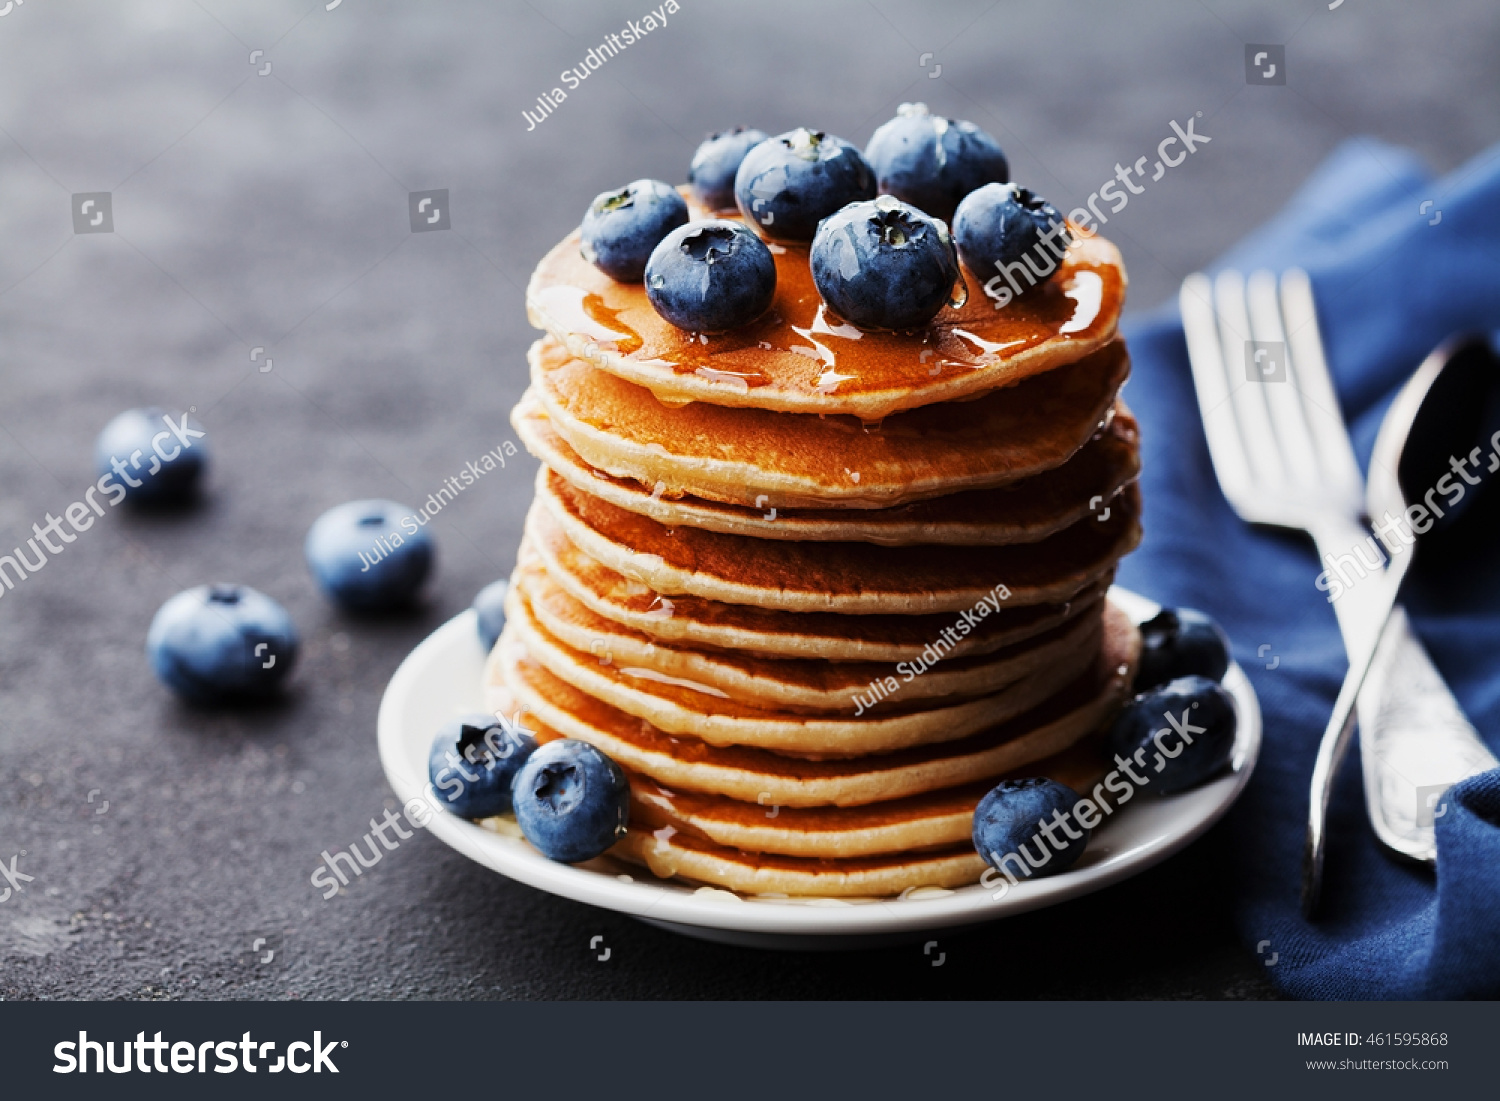 Stack of baked american pancakes or fritters with blueberries and honey syrup on rustic black table. Delicious dessert for breakfast. #461595868